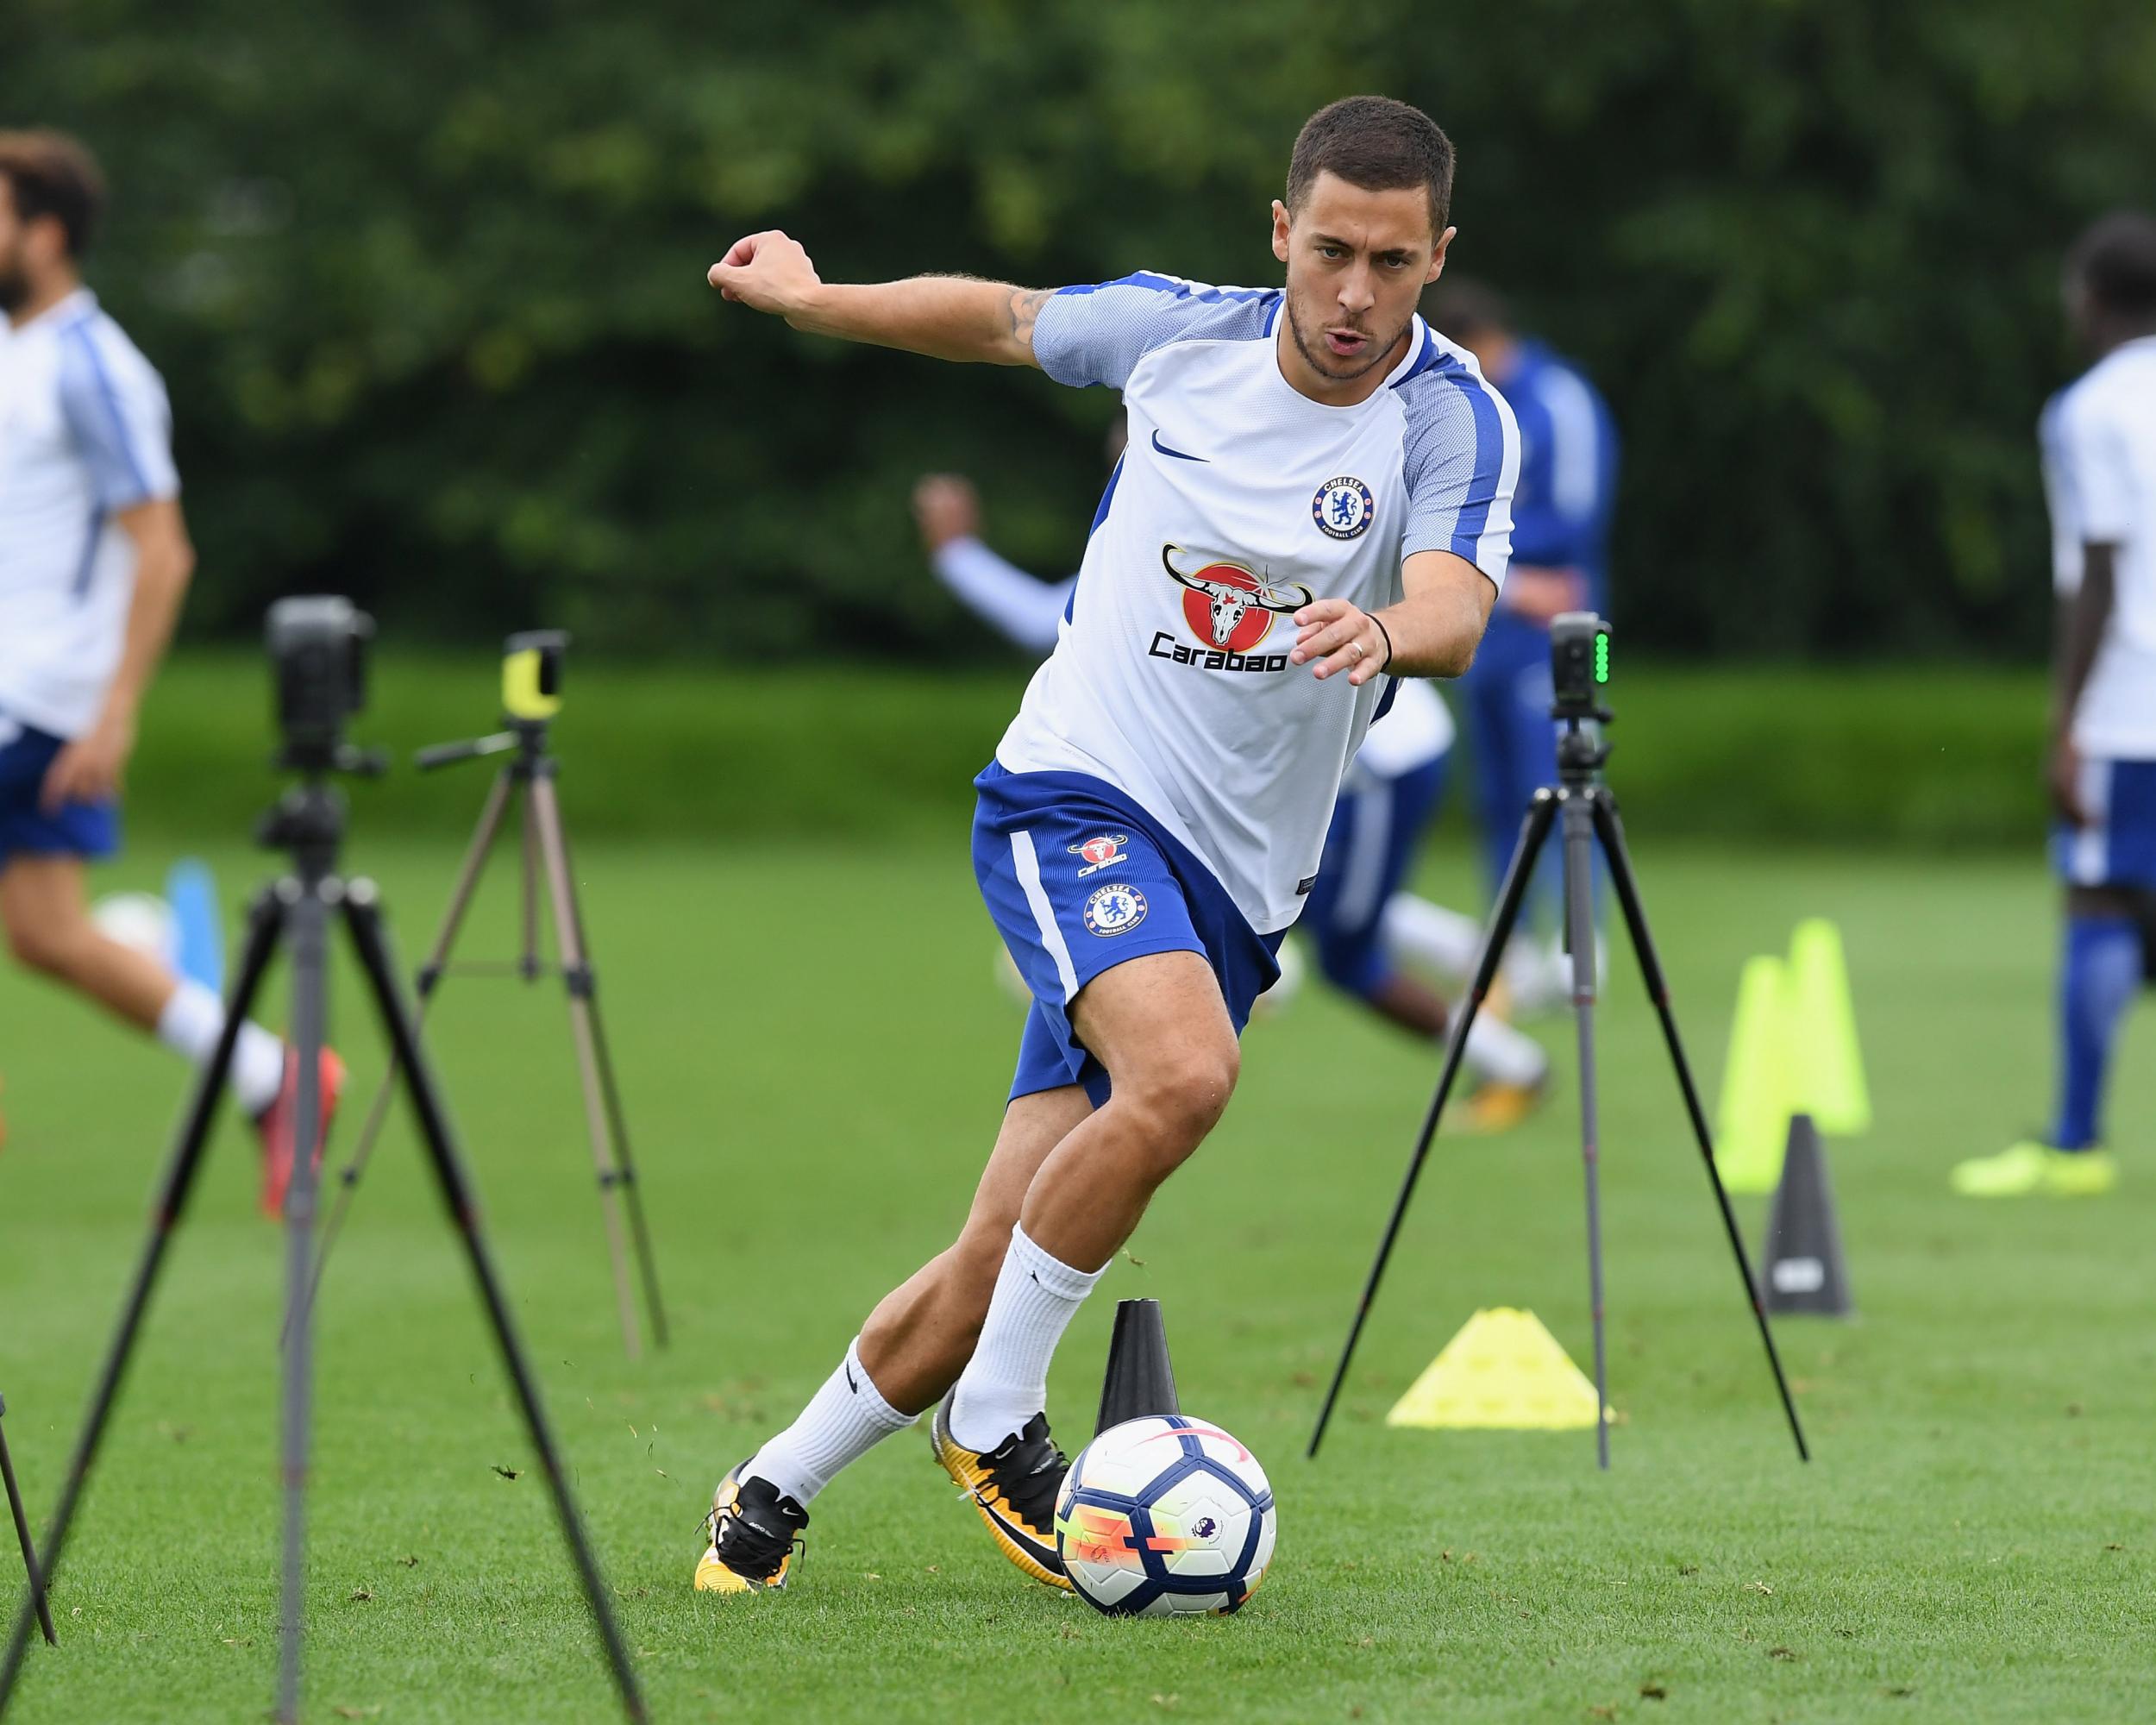 &#13;
Hazard is yet to play for Chelsea this season &#13;